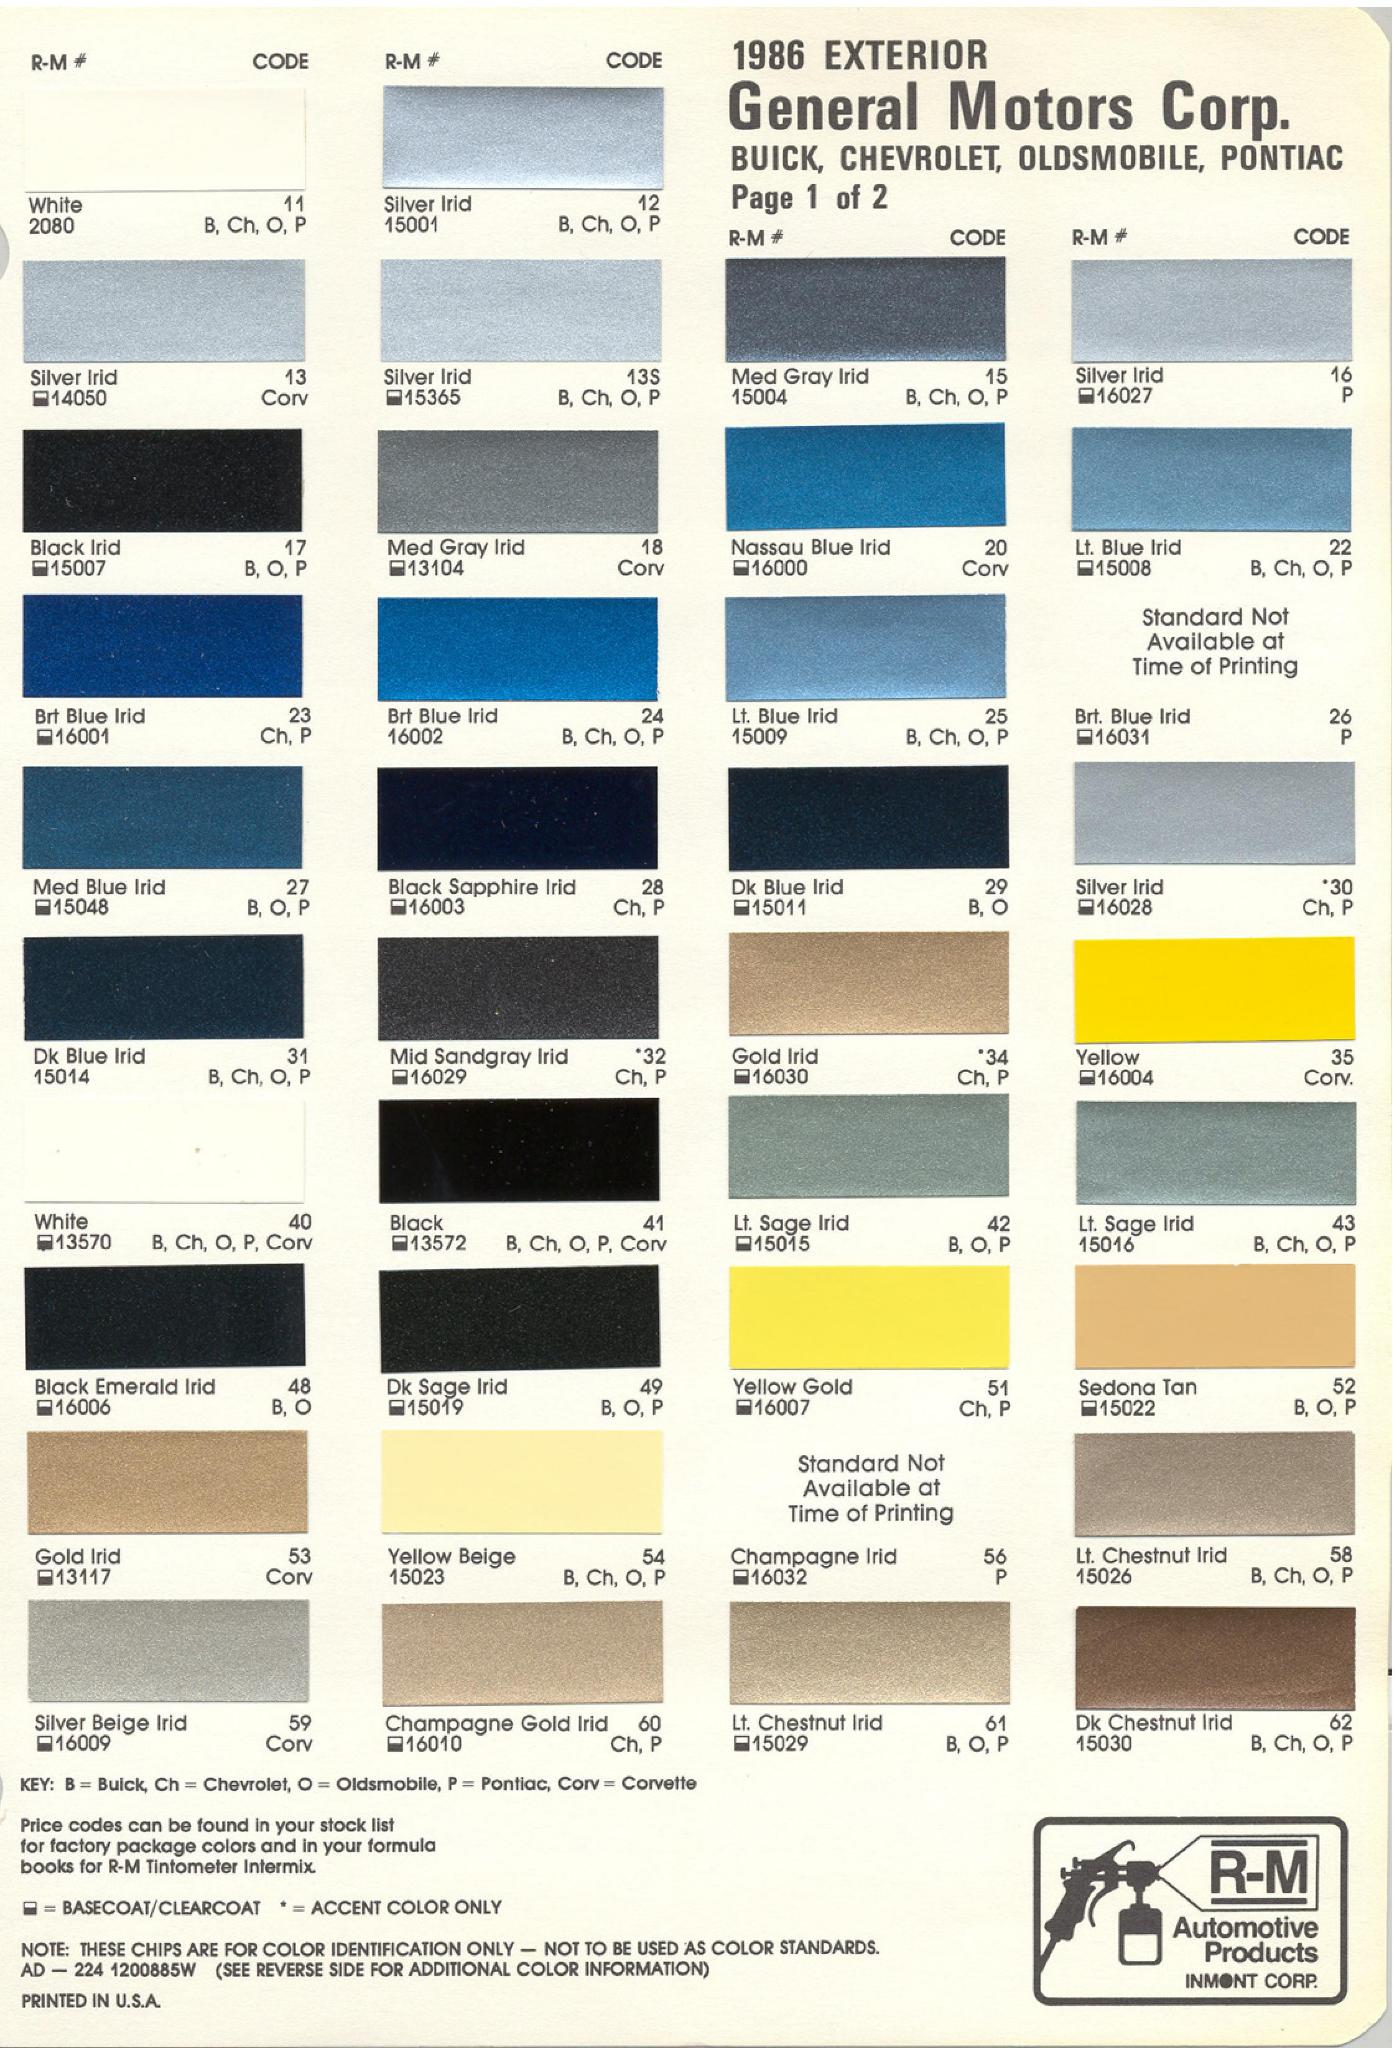 General Motors oem paint swatches, color codes and color names for 1986 vehicles.